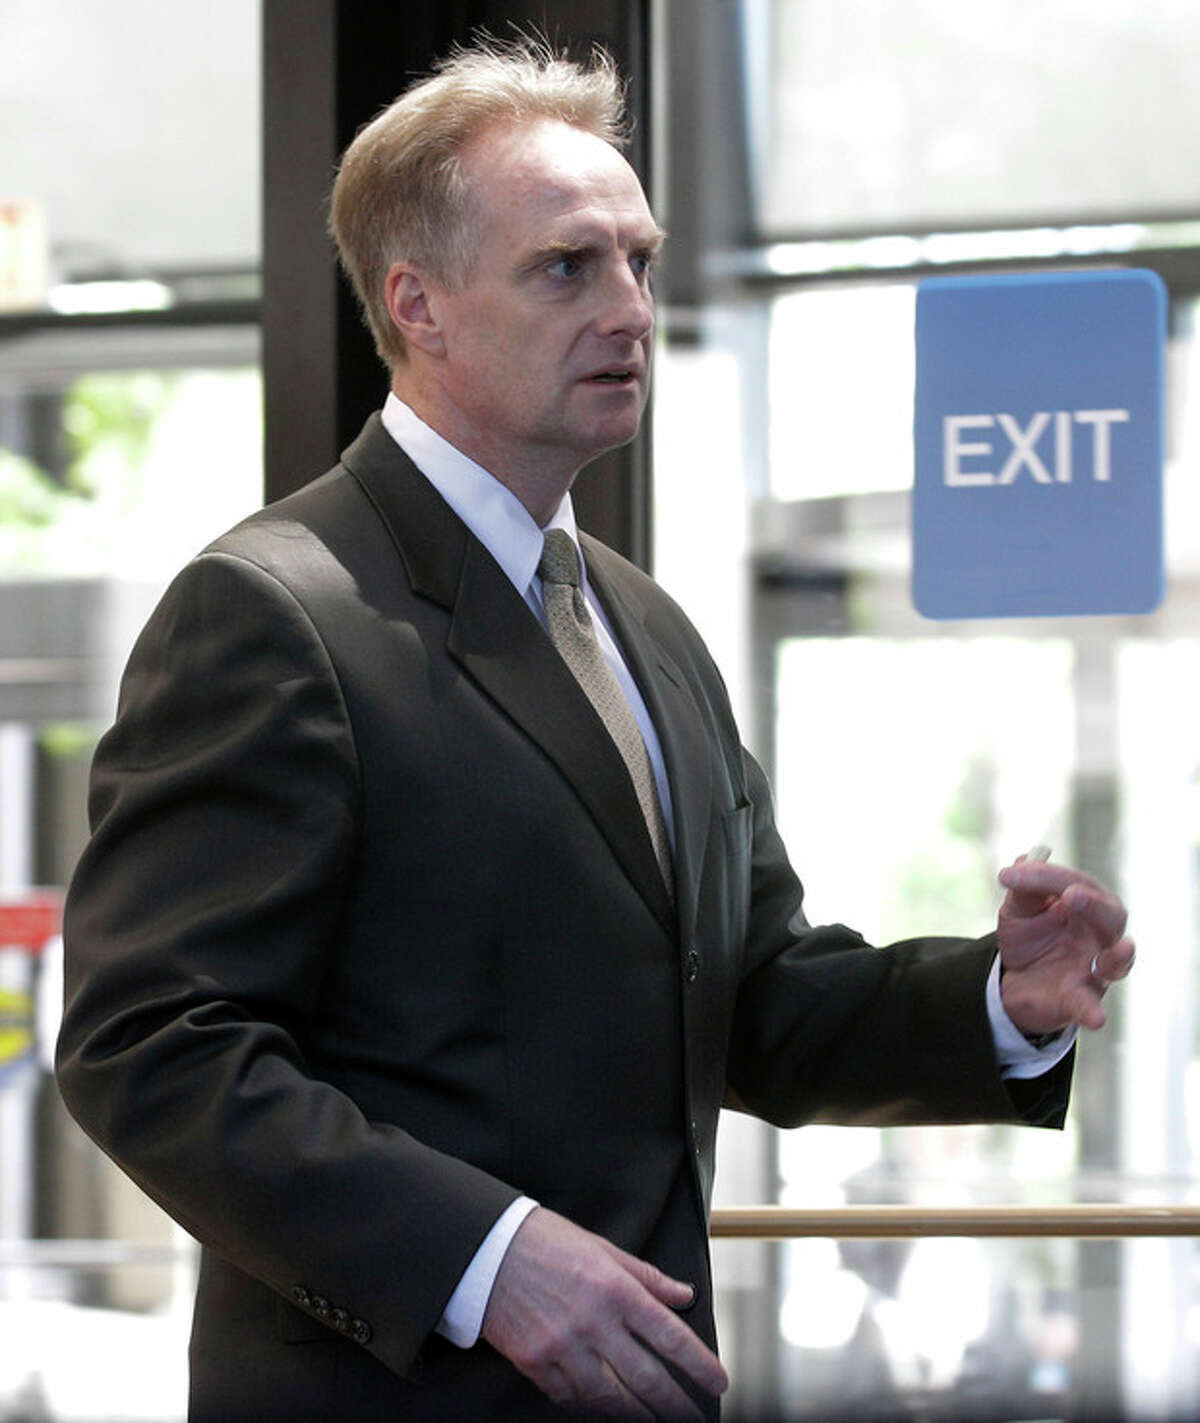 James McKay, lead prosecutor in the William Balfour murder trial, returns from hearing a question from the jury during deliberations at Cook County Criminal Court, Friday, May 11, 2012, in Chicago. Balfour, is charged in the 2008 murder of Oscar and Grammy winning performer Jennifer Hudson's mother, brother and nephew. (AP Photo/M. Spencer Green)